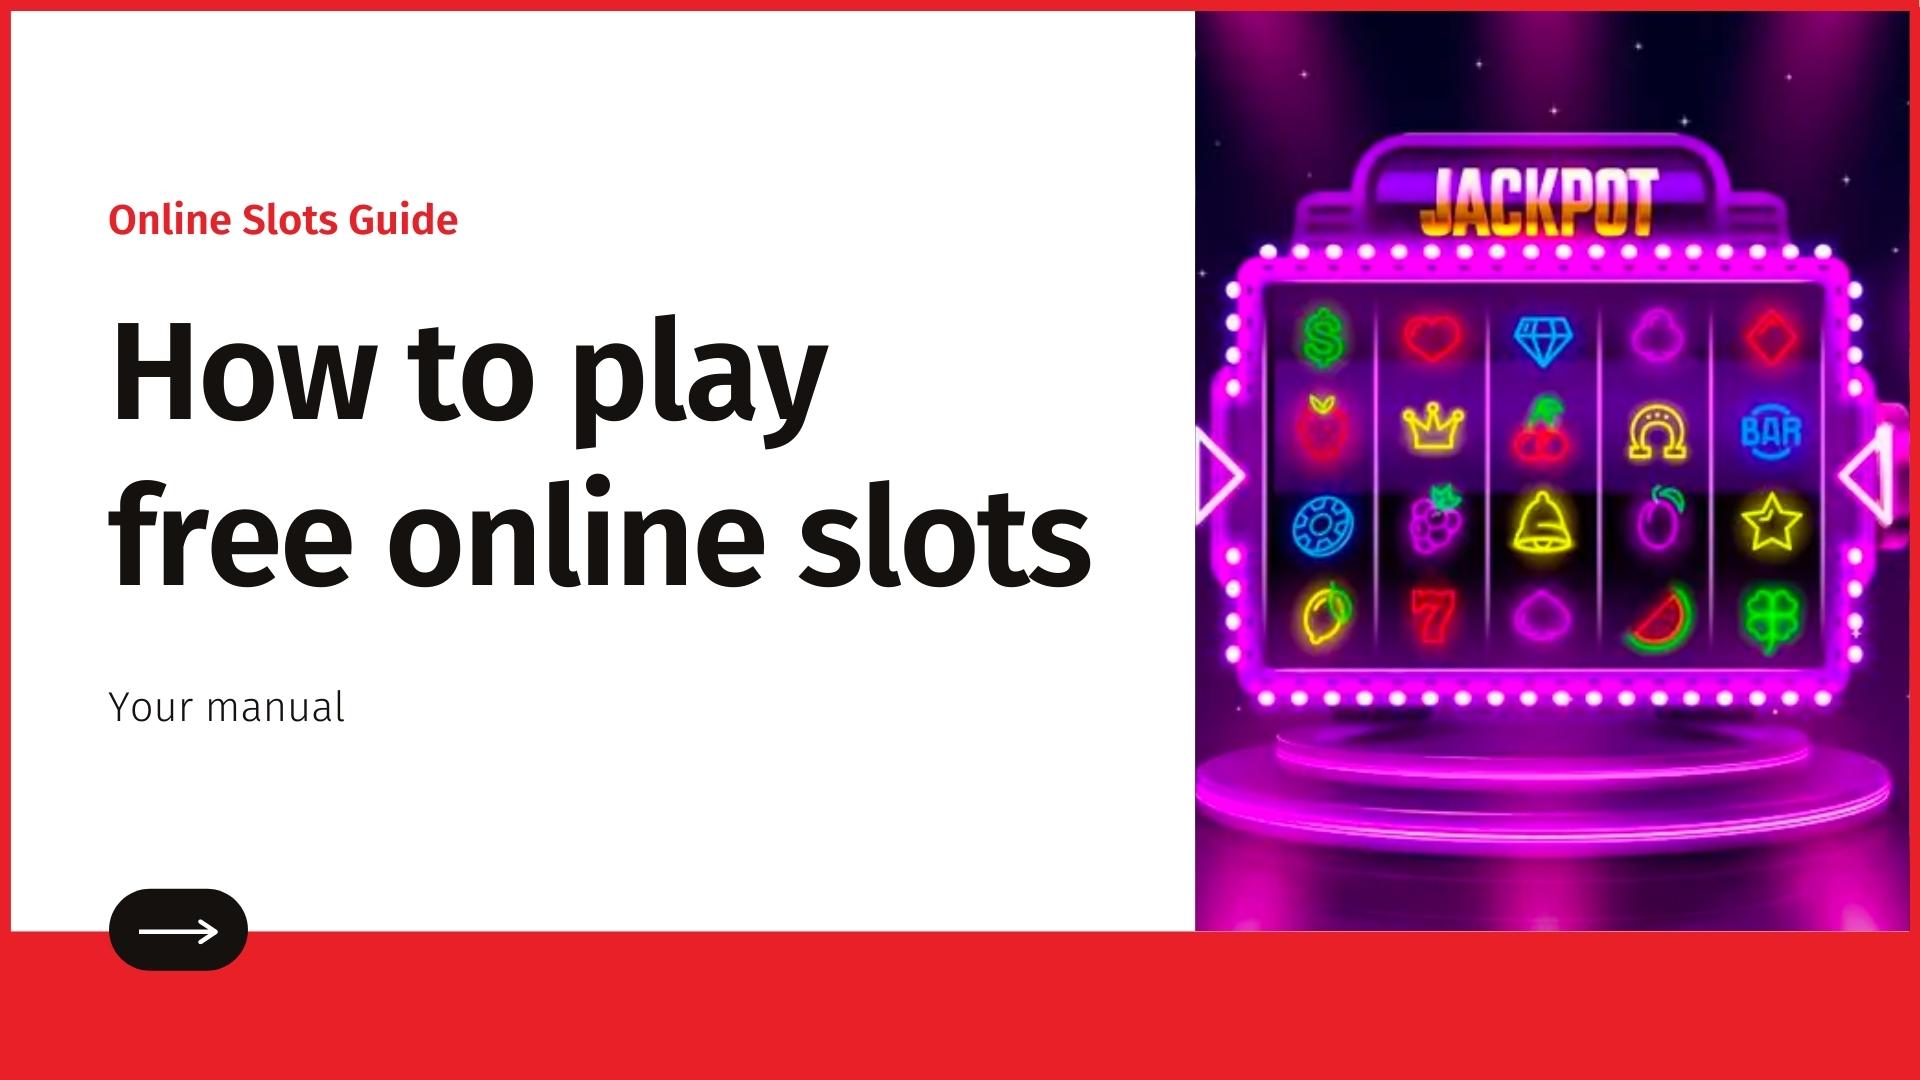 How to play free online slots - your manual